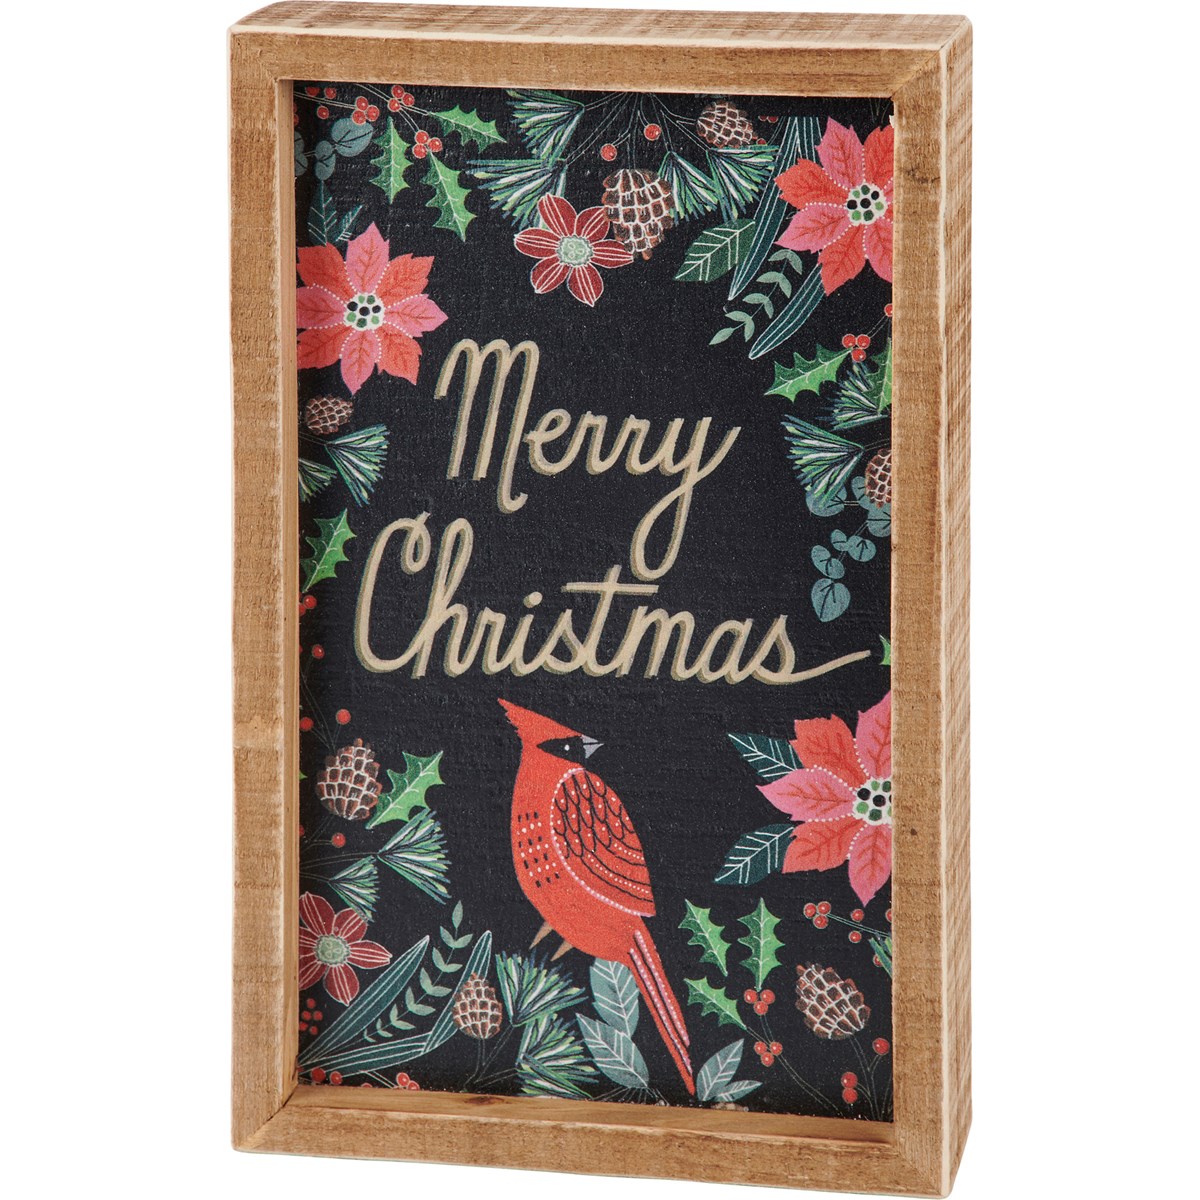 Moody Merry Christmas Inset Box Sign - Wood